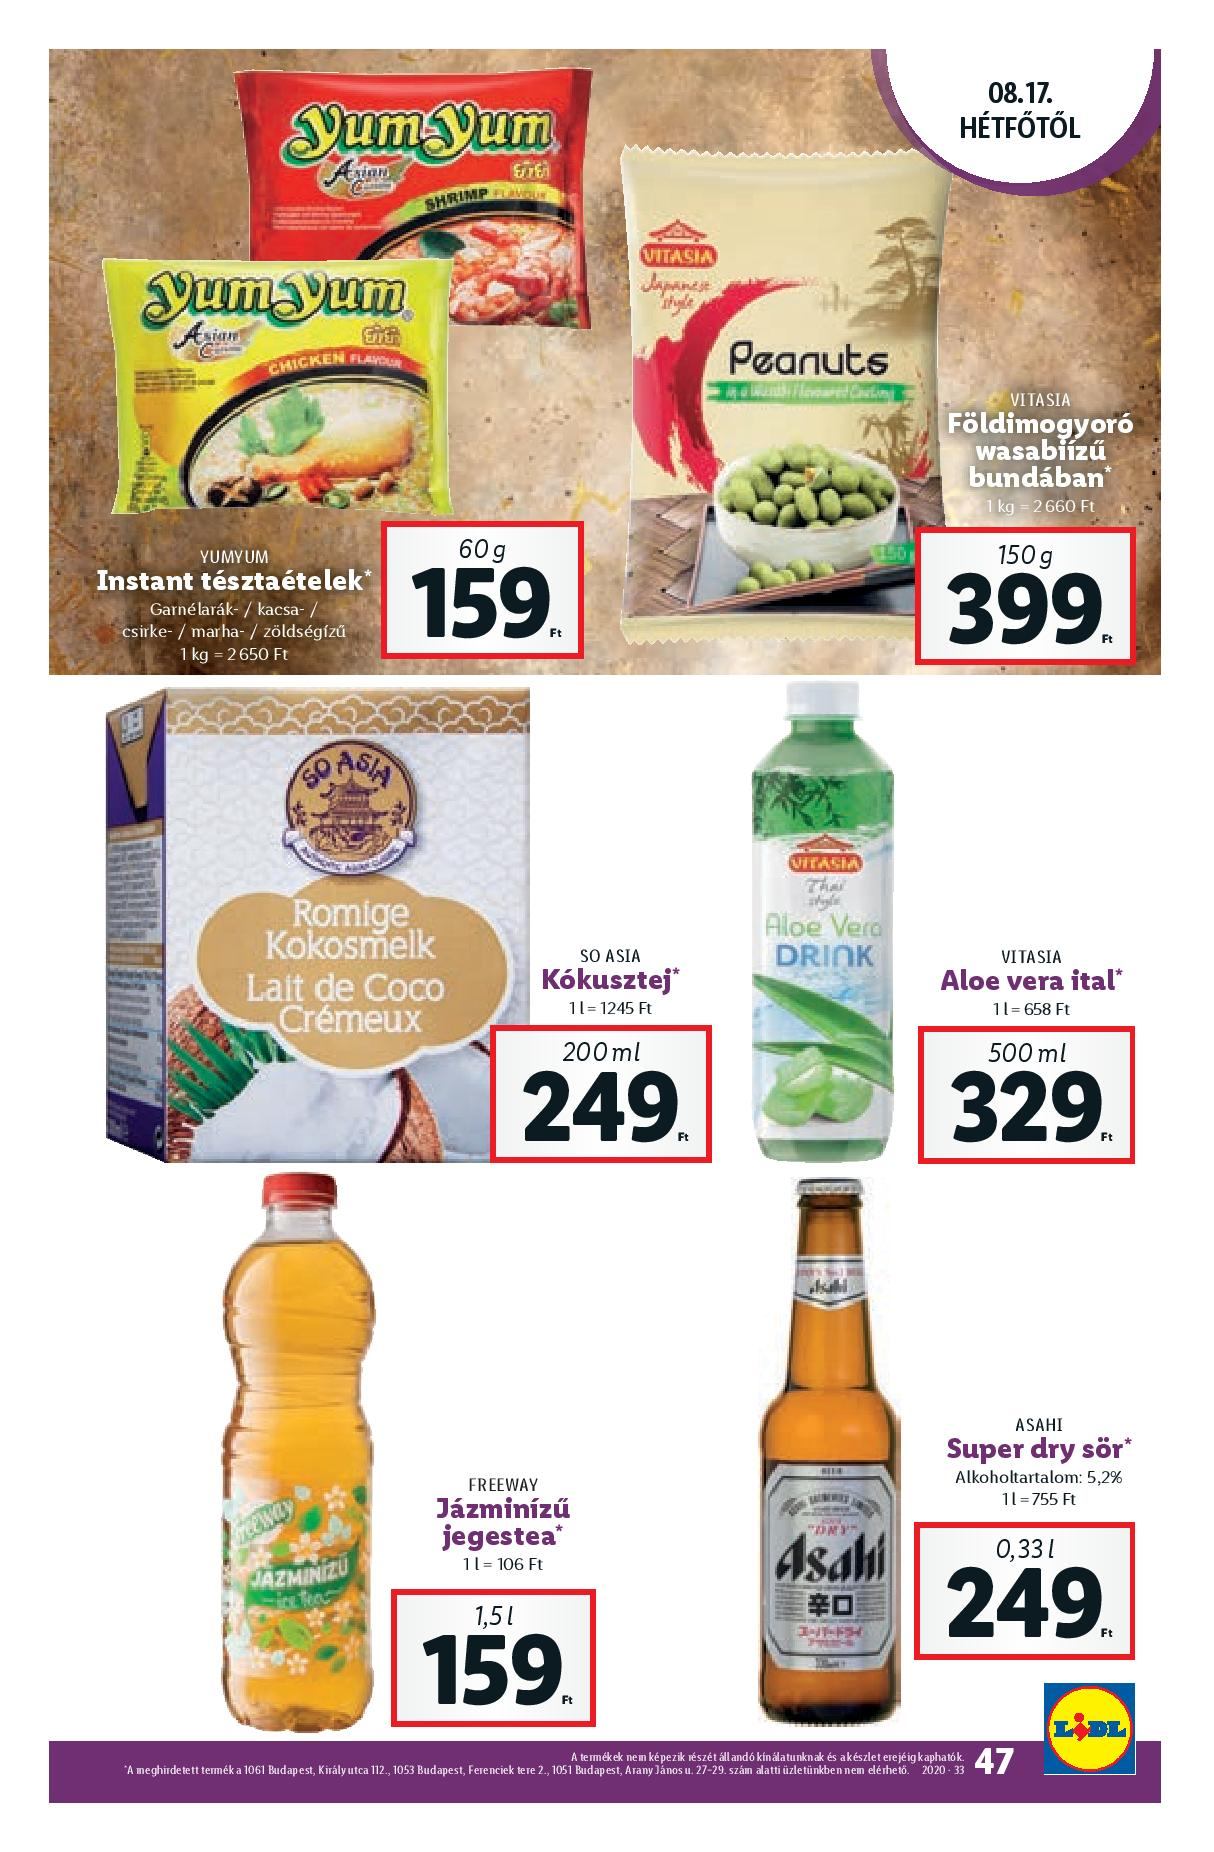 lidl0813-page-047